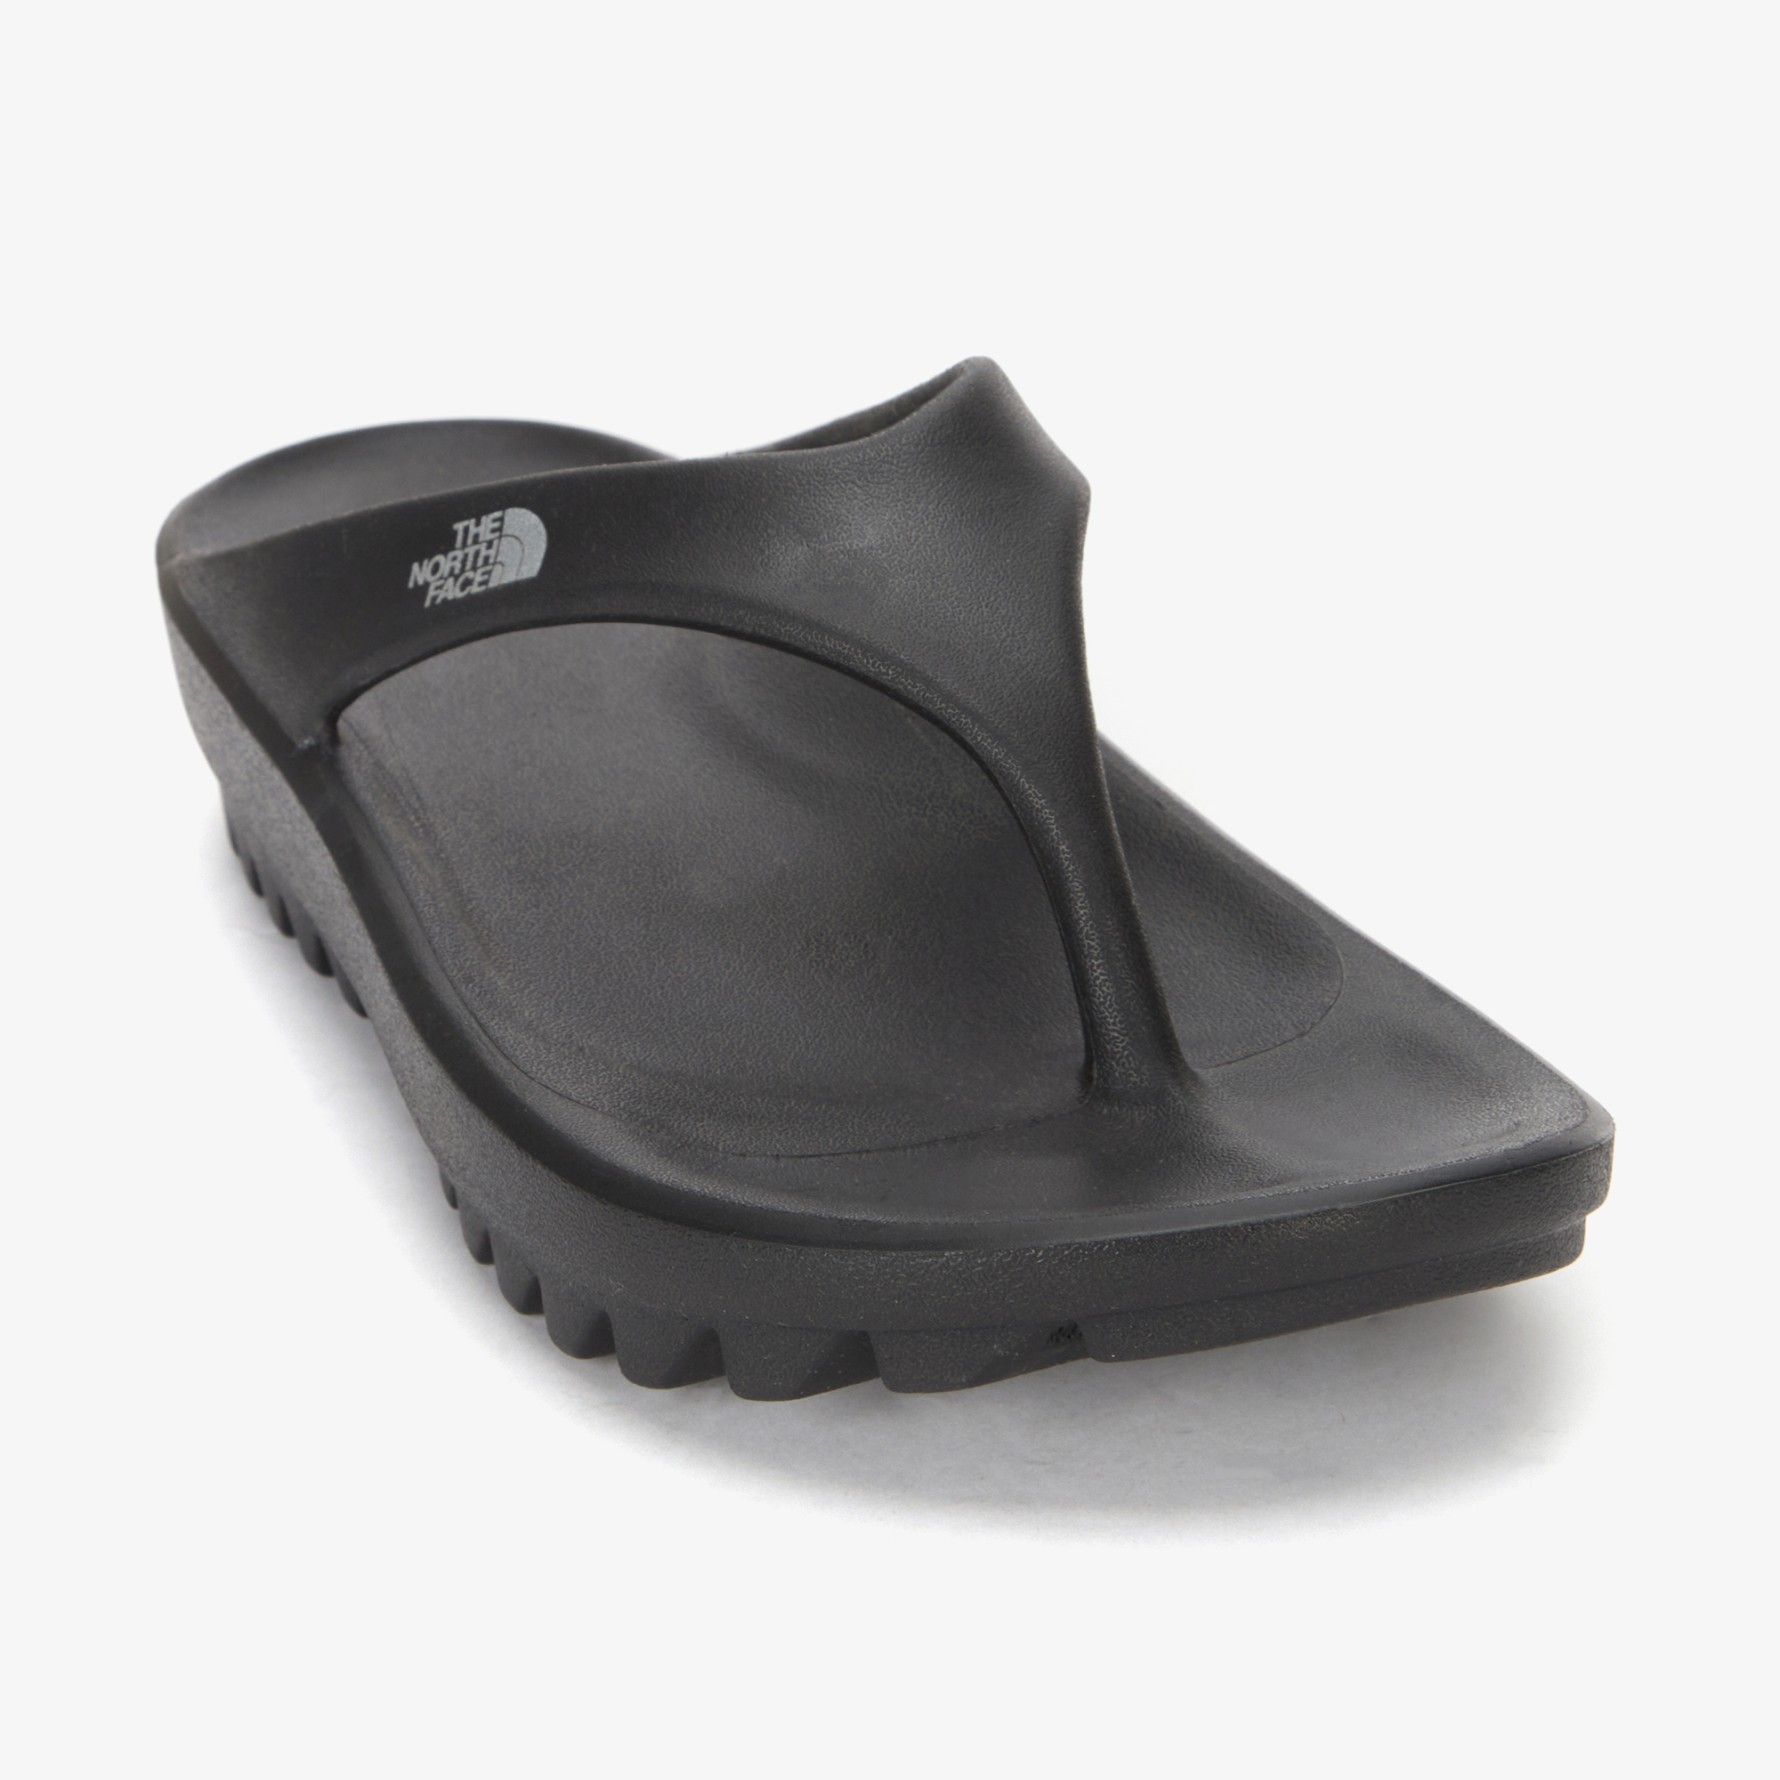 THE NORTH FACE - WHIZZY FLIP EX (BLACK)